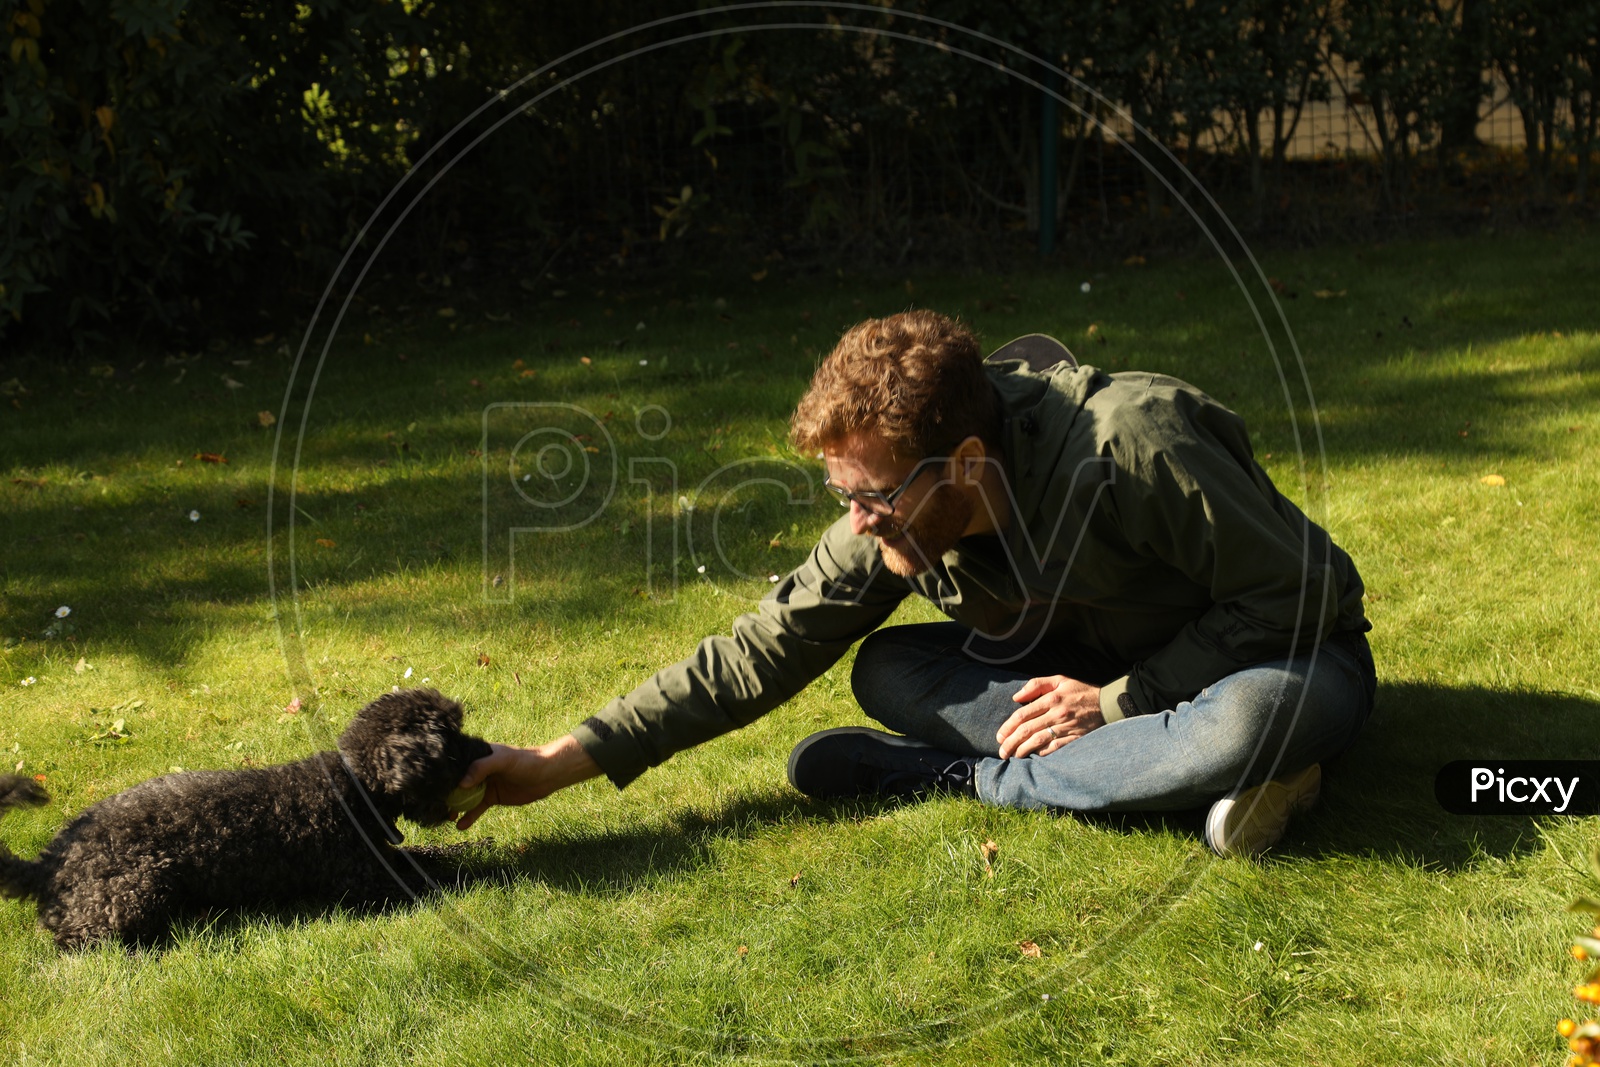 Young  Man Playing With a Pet Dog In a Lawn Garden